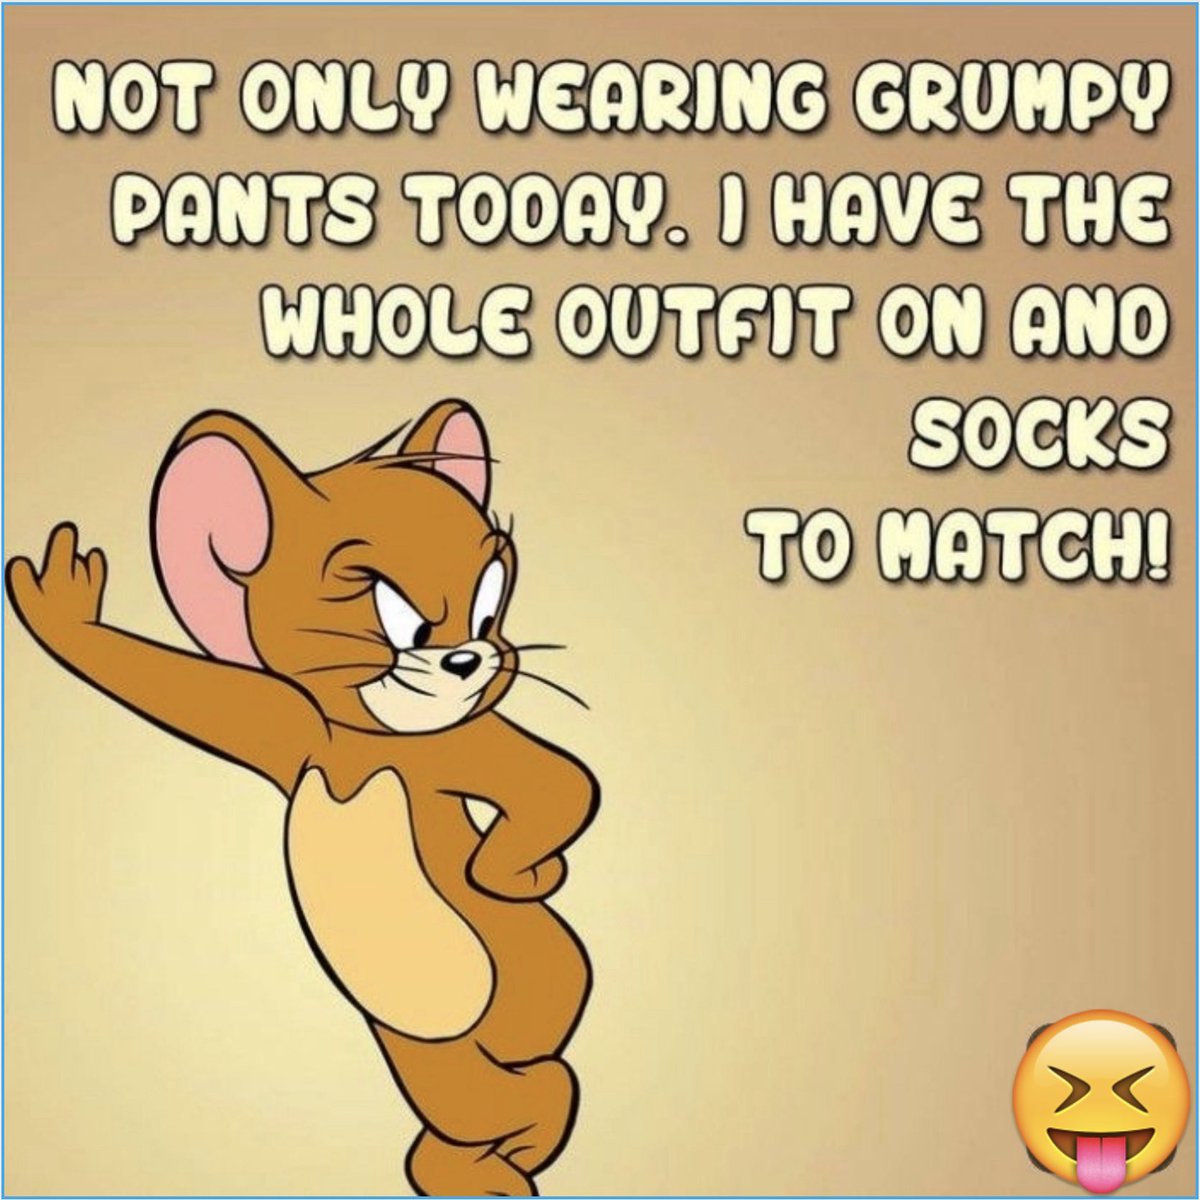 That’s right! So stay out of my way!! 😂😂 #grumpypants #madattheworld #itsokay #nowfindyourhappy #fridayfunnies